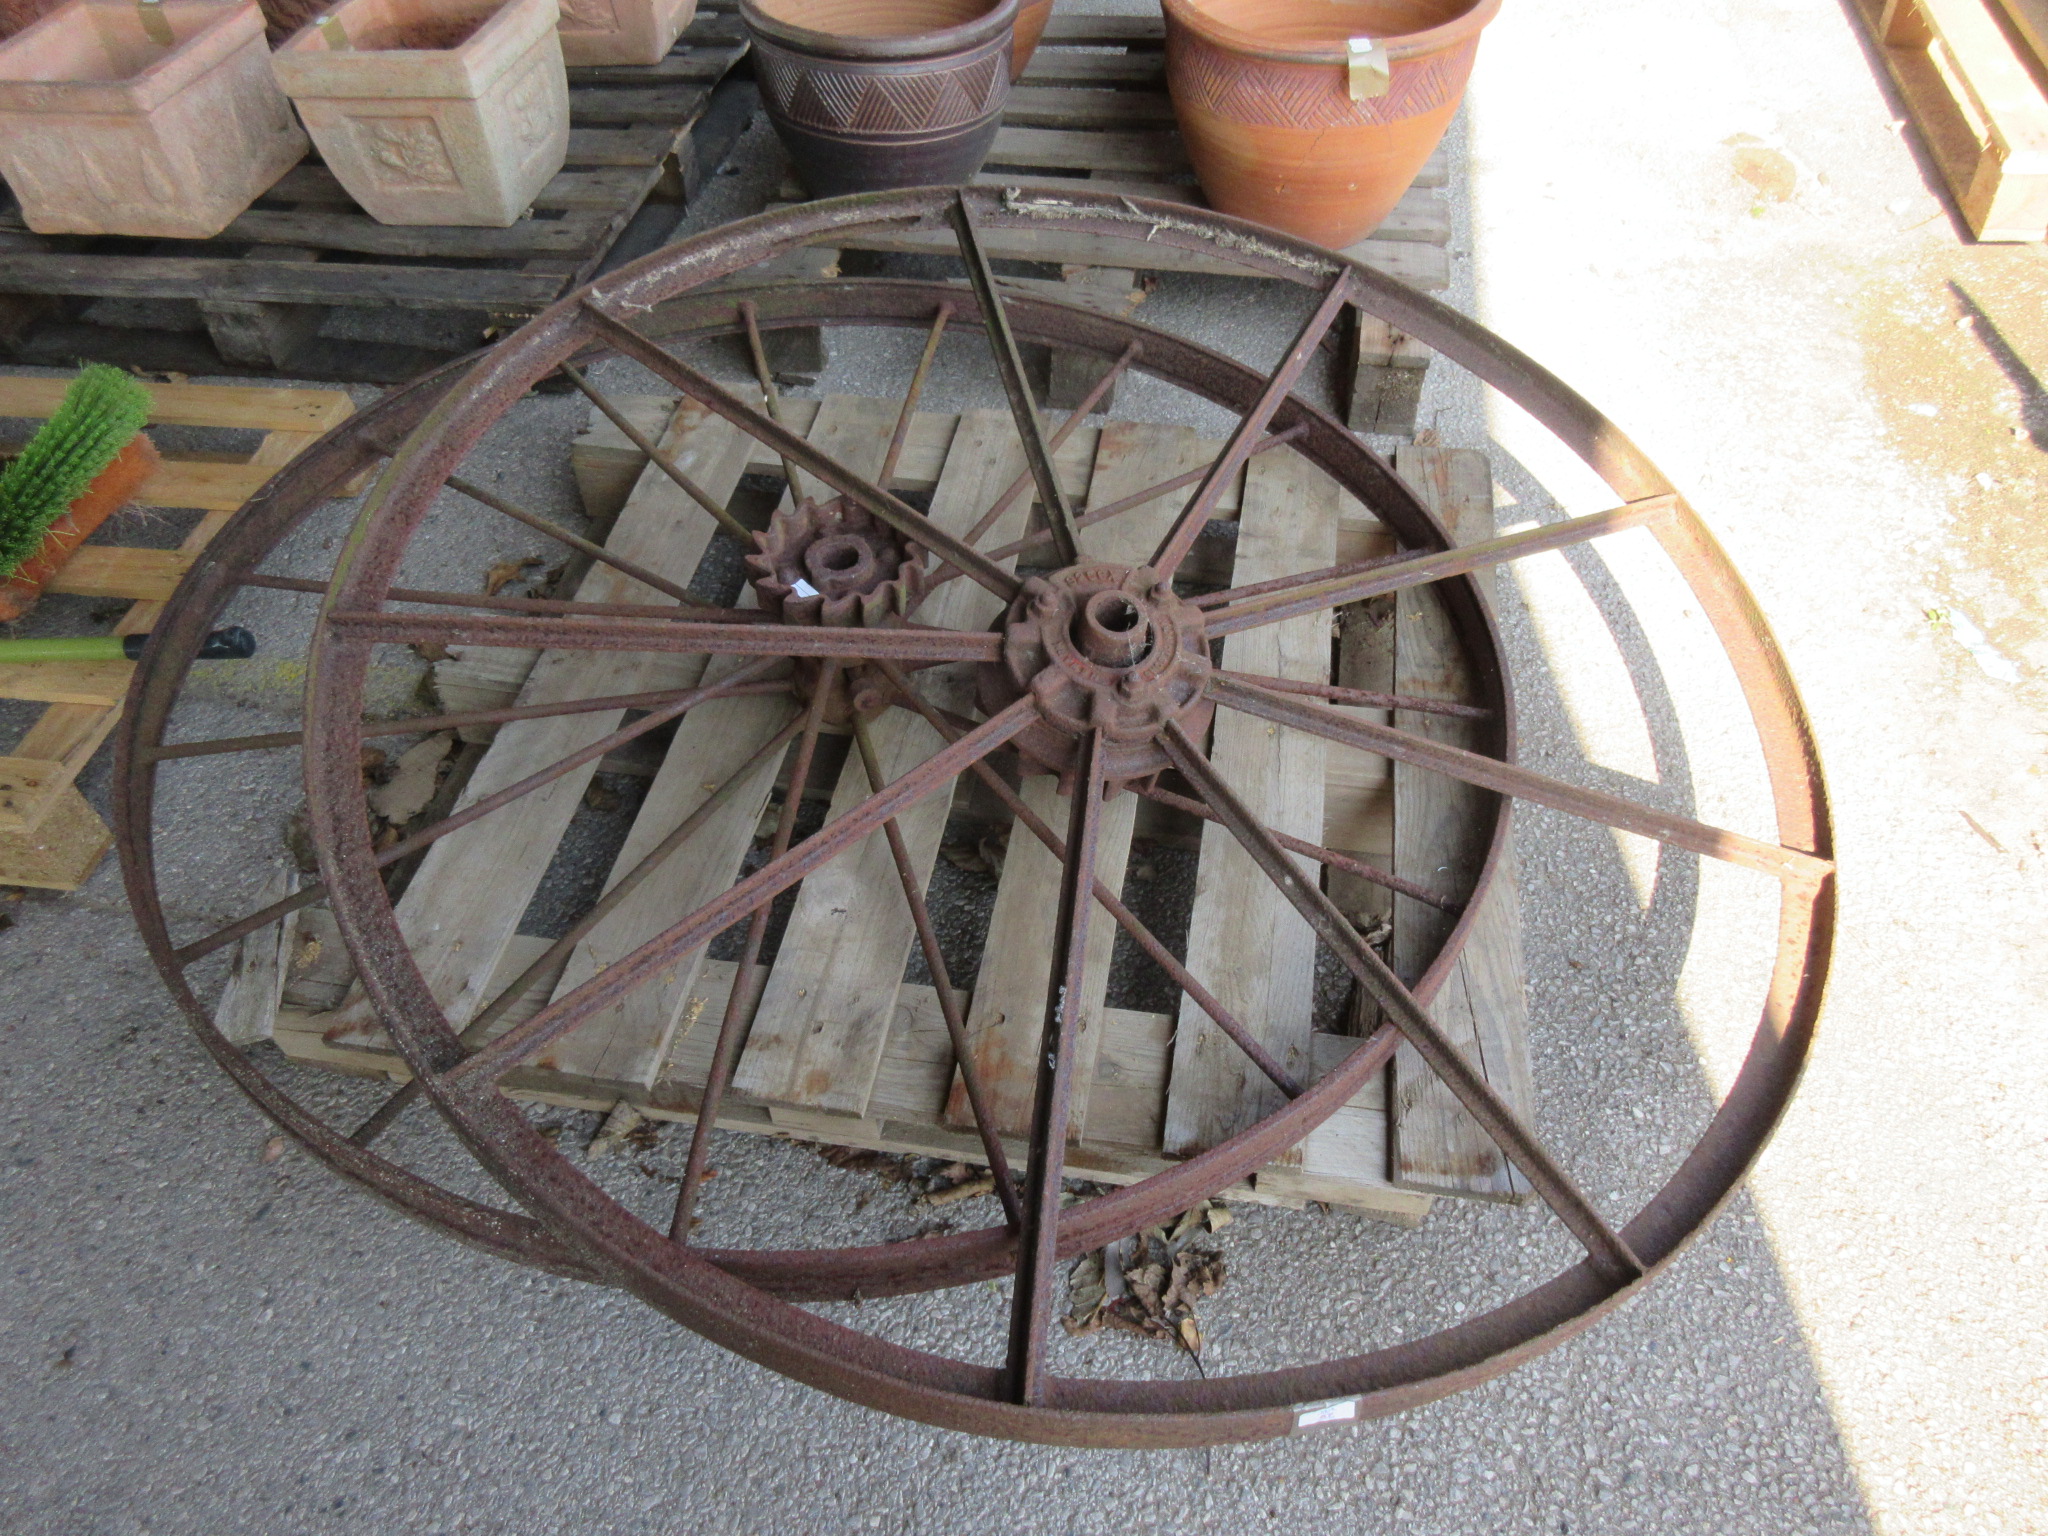 TWO VERY LARGE VINTAGE IRON WHEELS ONE NAMED FOR NICHOLSONS NEWARK NUMBERED 925X PROBABLY FROM